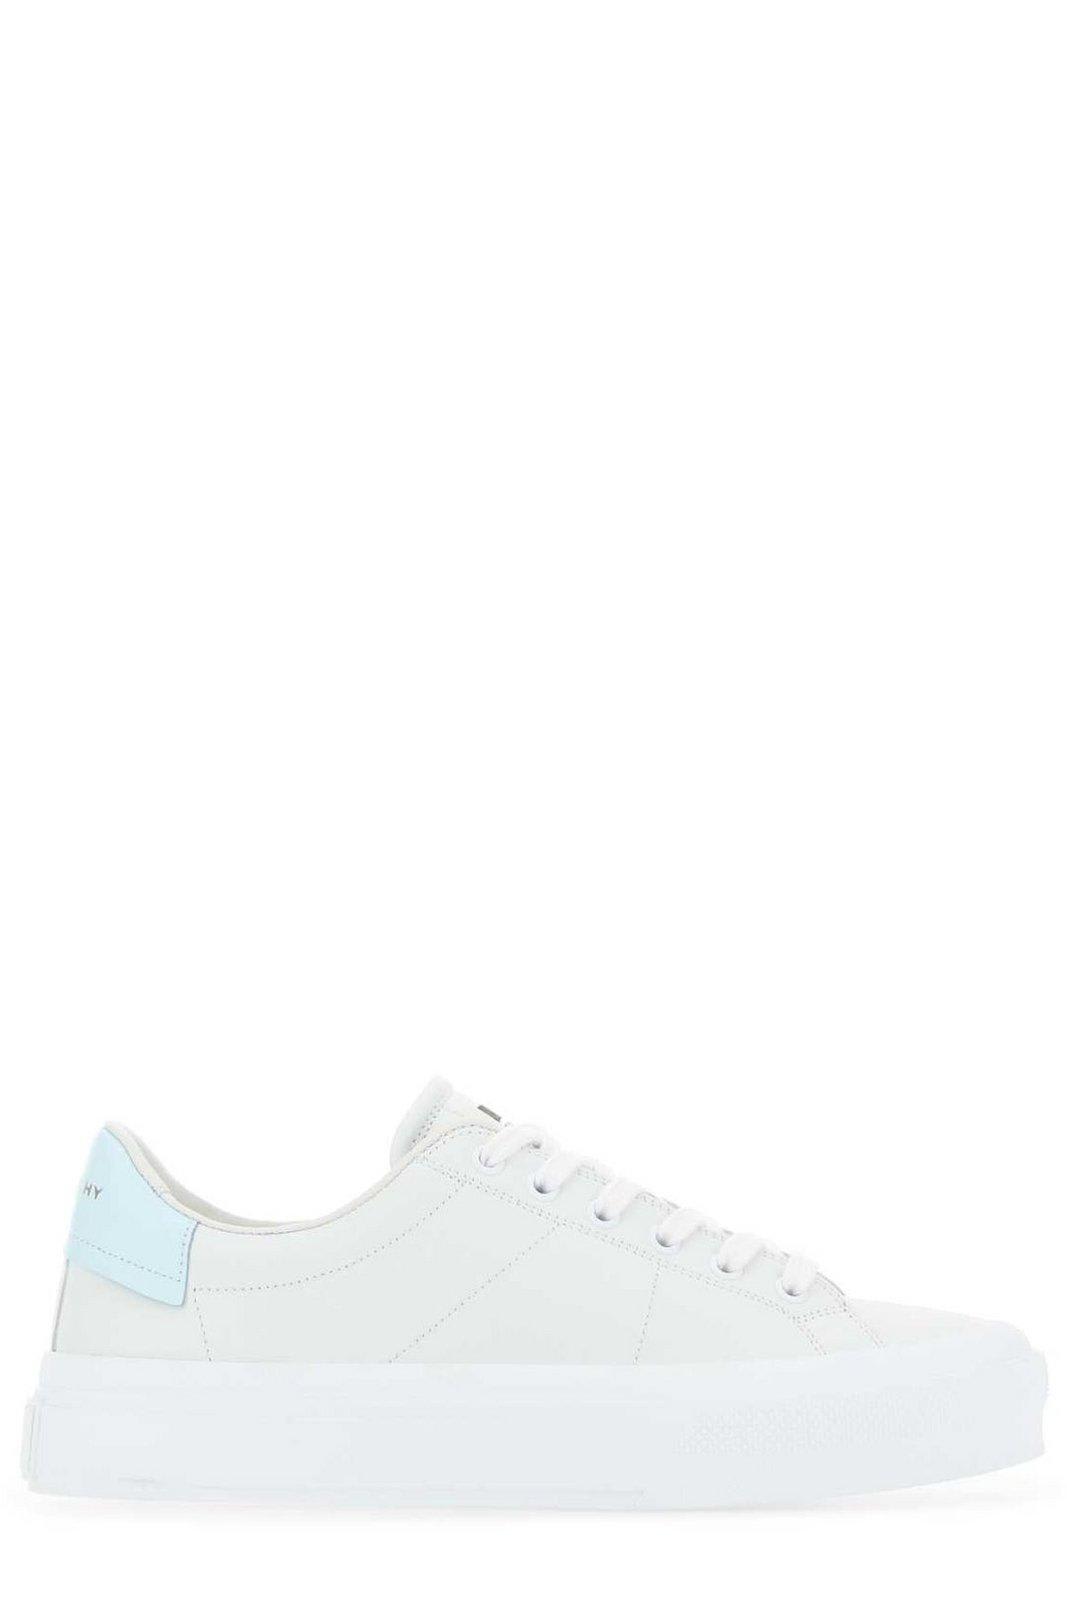 Givenchy City Court Lace-up Sneakers